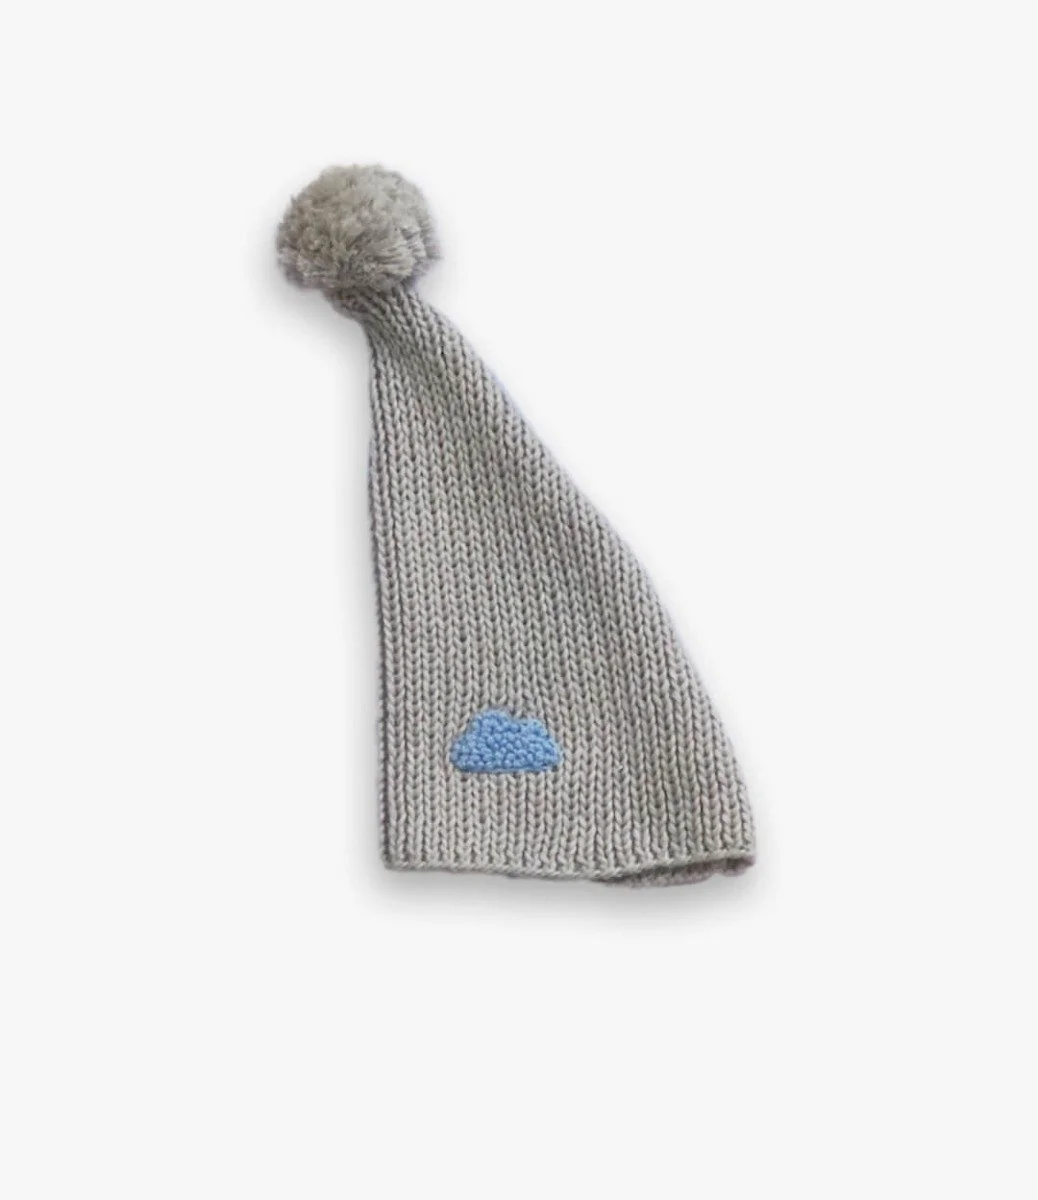 Baby Boy Knitted Cotton Hat by Fofinha - Blue Cloud